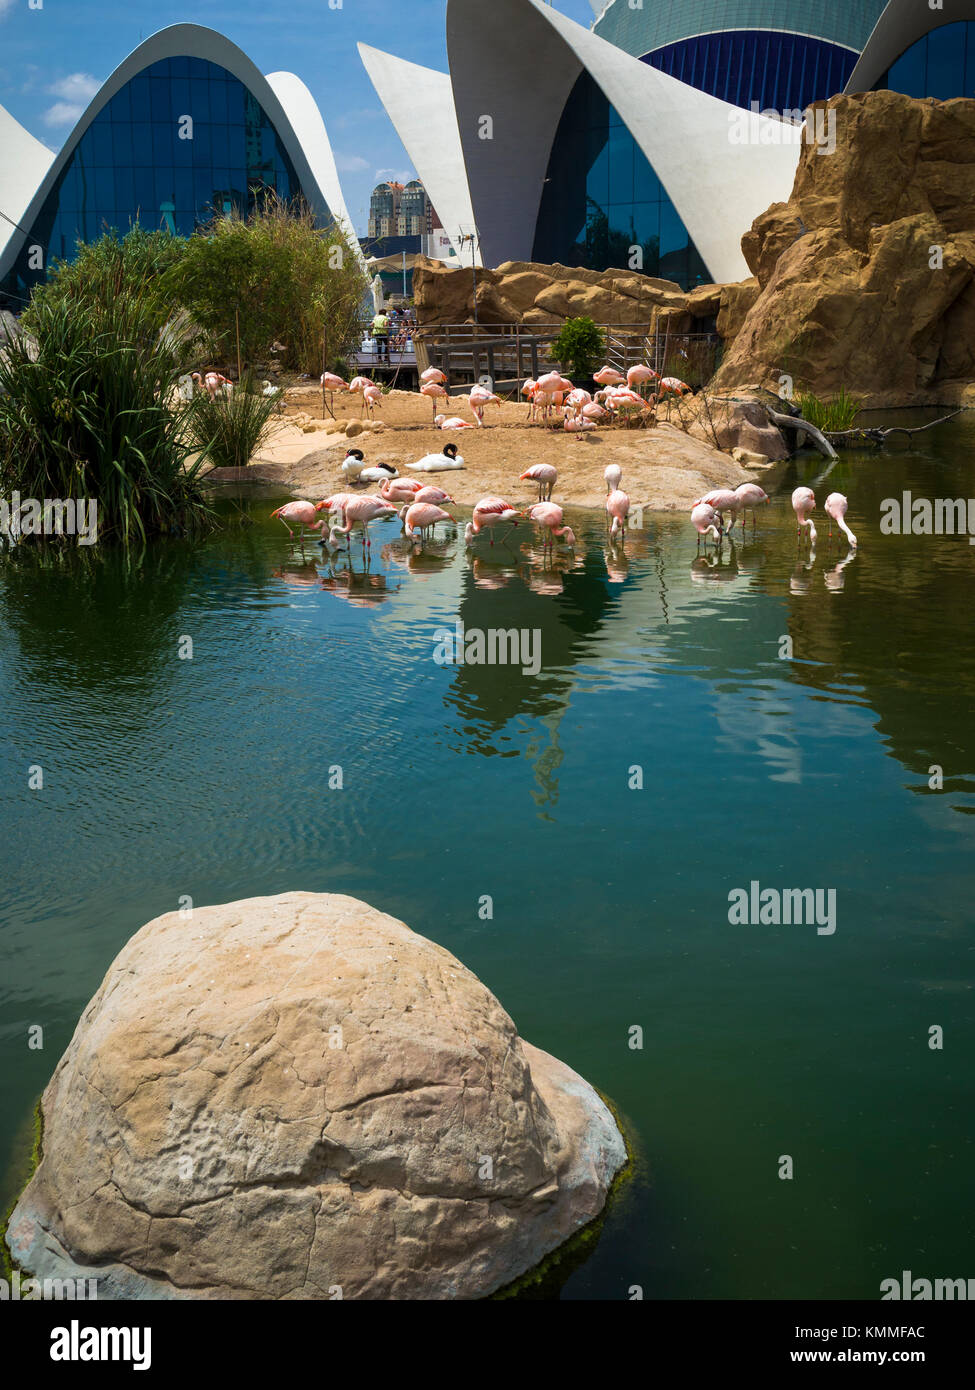 Flamingos by the waters of L'Oceanografic, City of Arts and Sciences, Valencia, Spain. Stock Photo